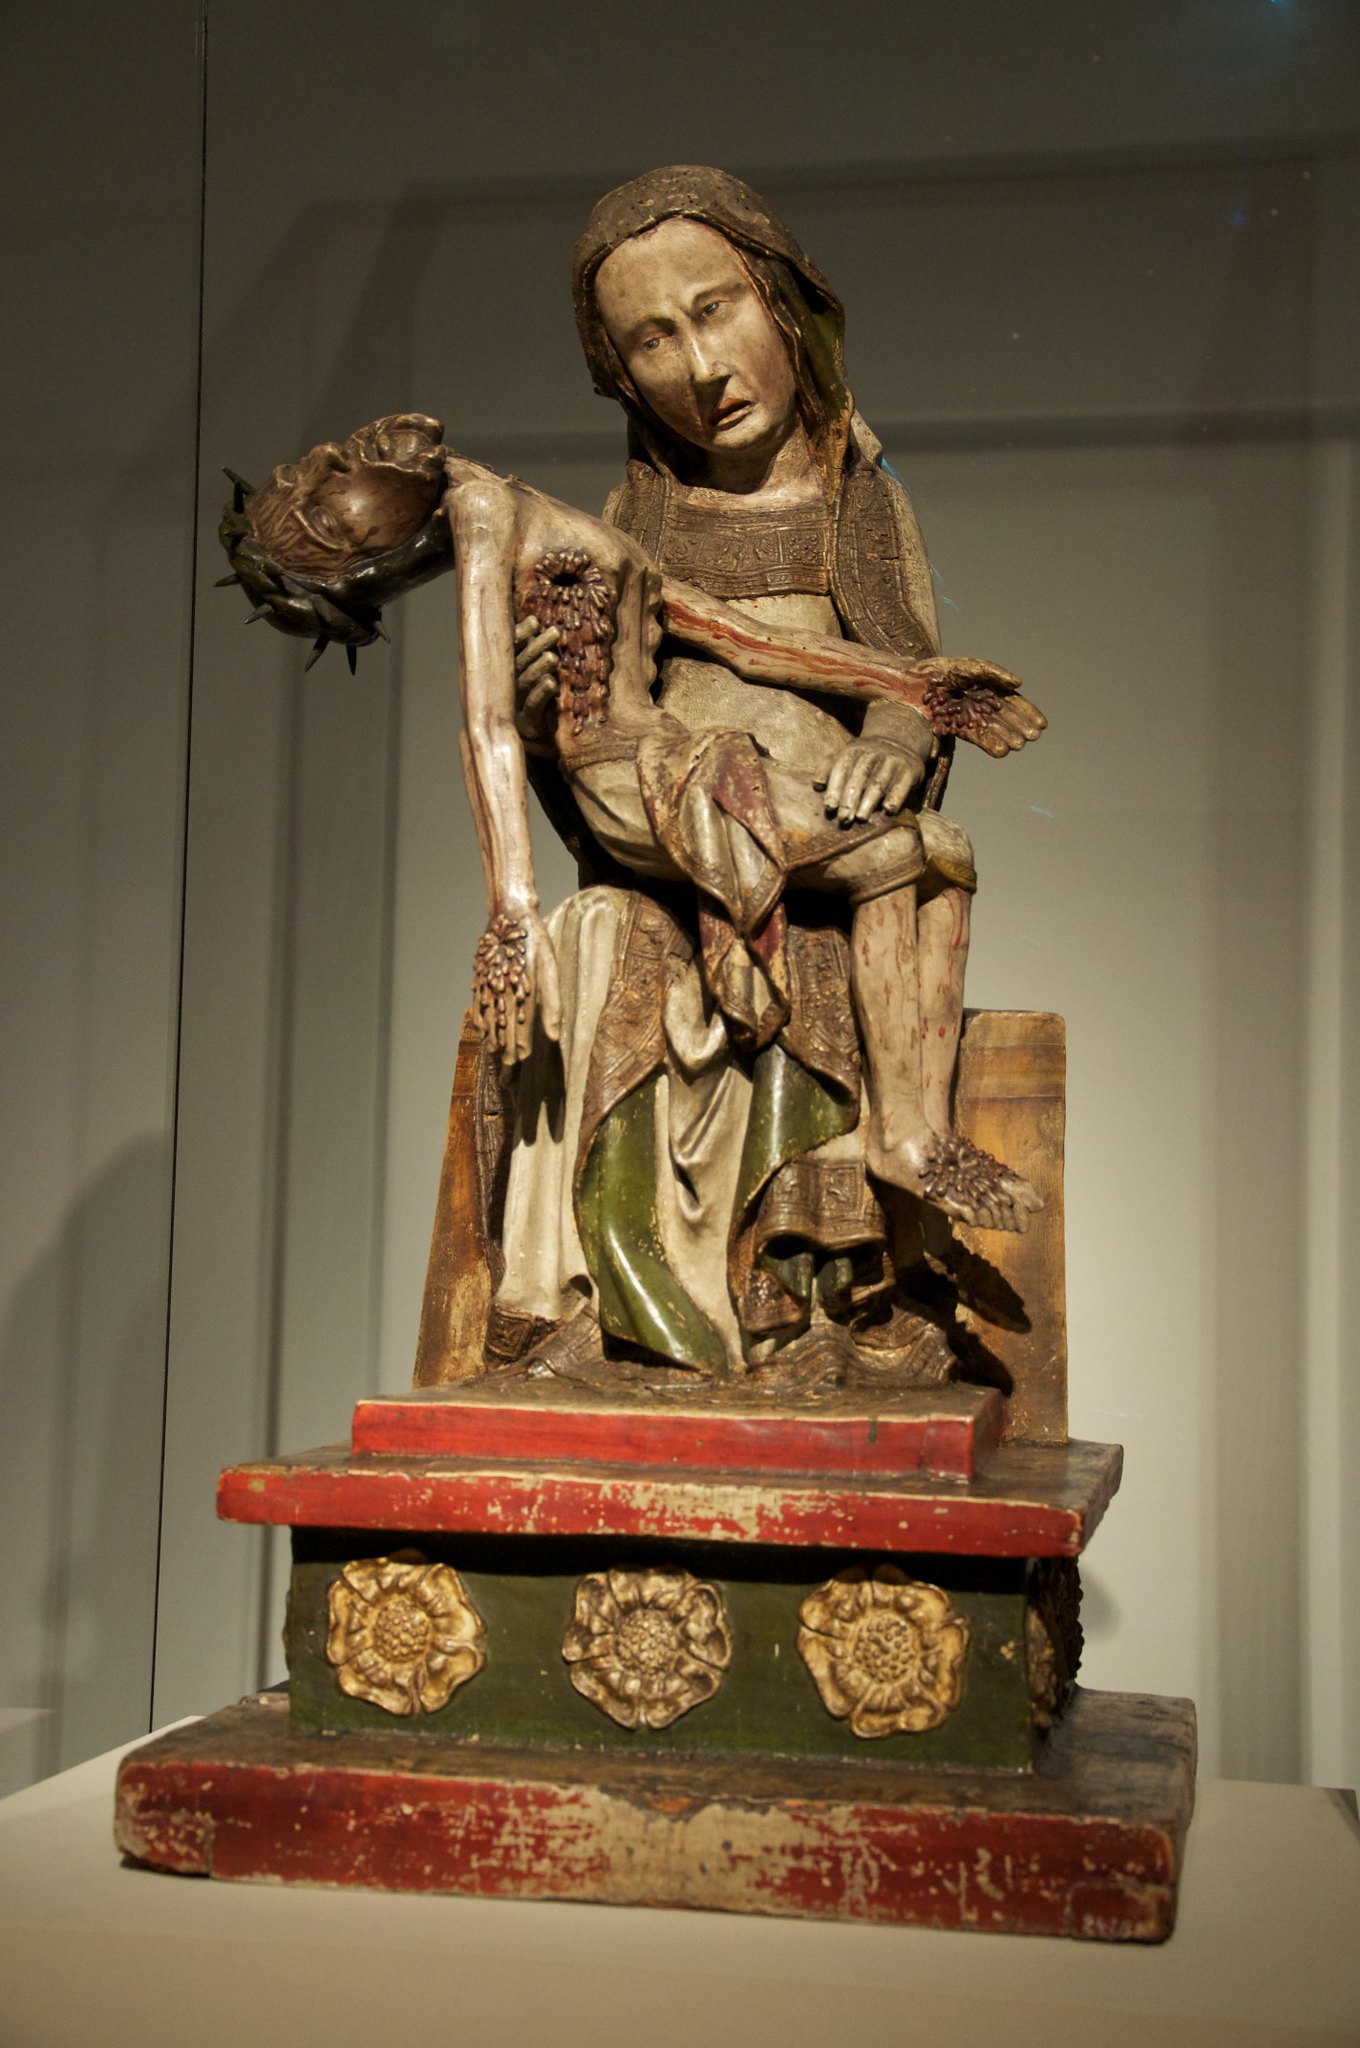 <ul><li><p>c. 1300- 1325, painted wood, 34 1/2 in high.</p></li><li><p>devastating image of Mary holding the dead Christ. Just sows Mary and Christ so you can focus on Mary&apos;s response. -Gruesome details of the crucifixion on his sides hands and face.</p></li><li><p>Mary seems more upset over his death like it was a surprise to her. emphasizes her humanity. Changes how the Middle Age art views Mary.</p></li></ul>